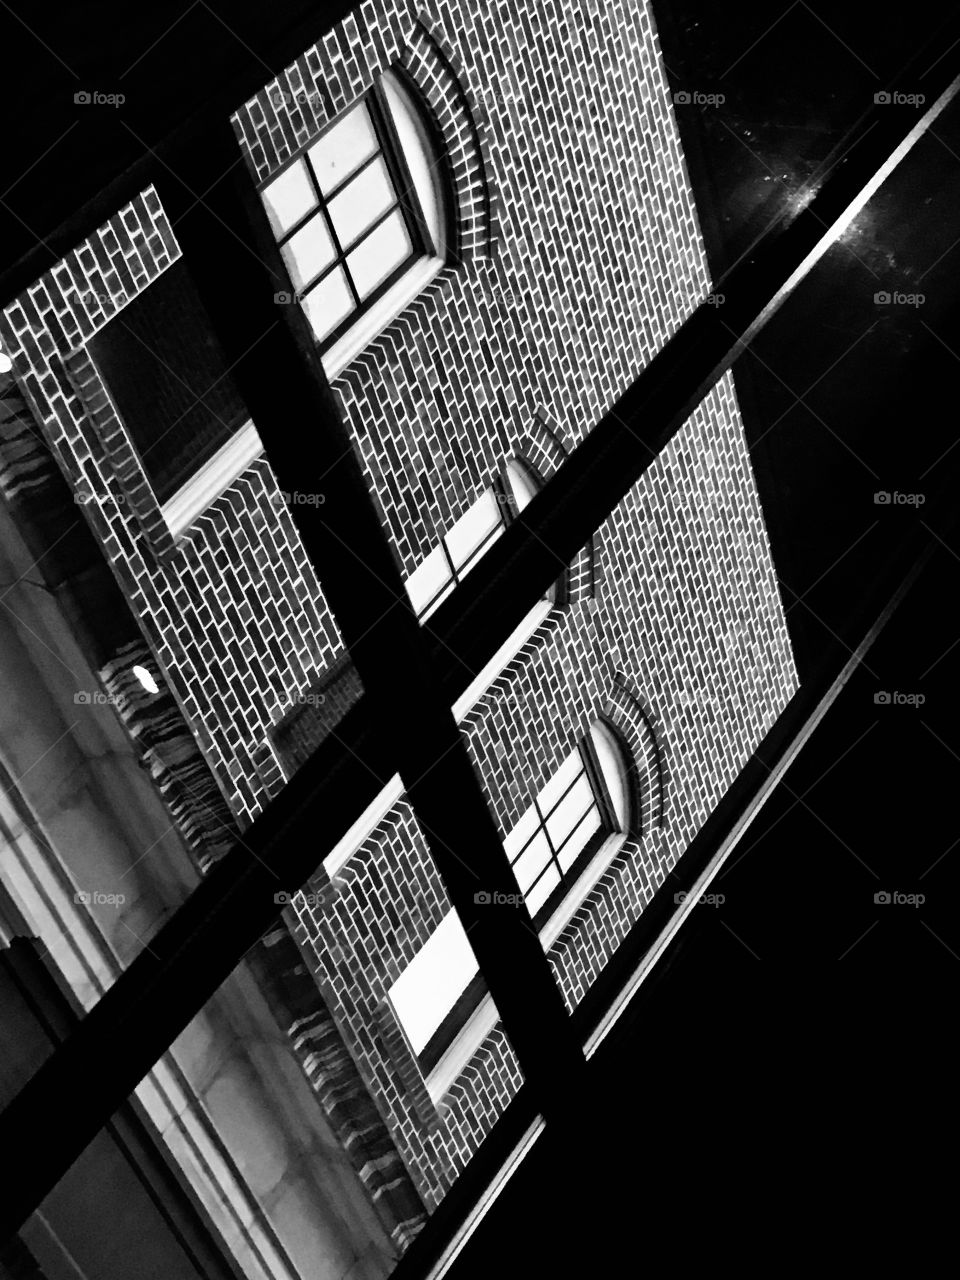 Bricks, windows and lines in black and white 